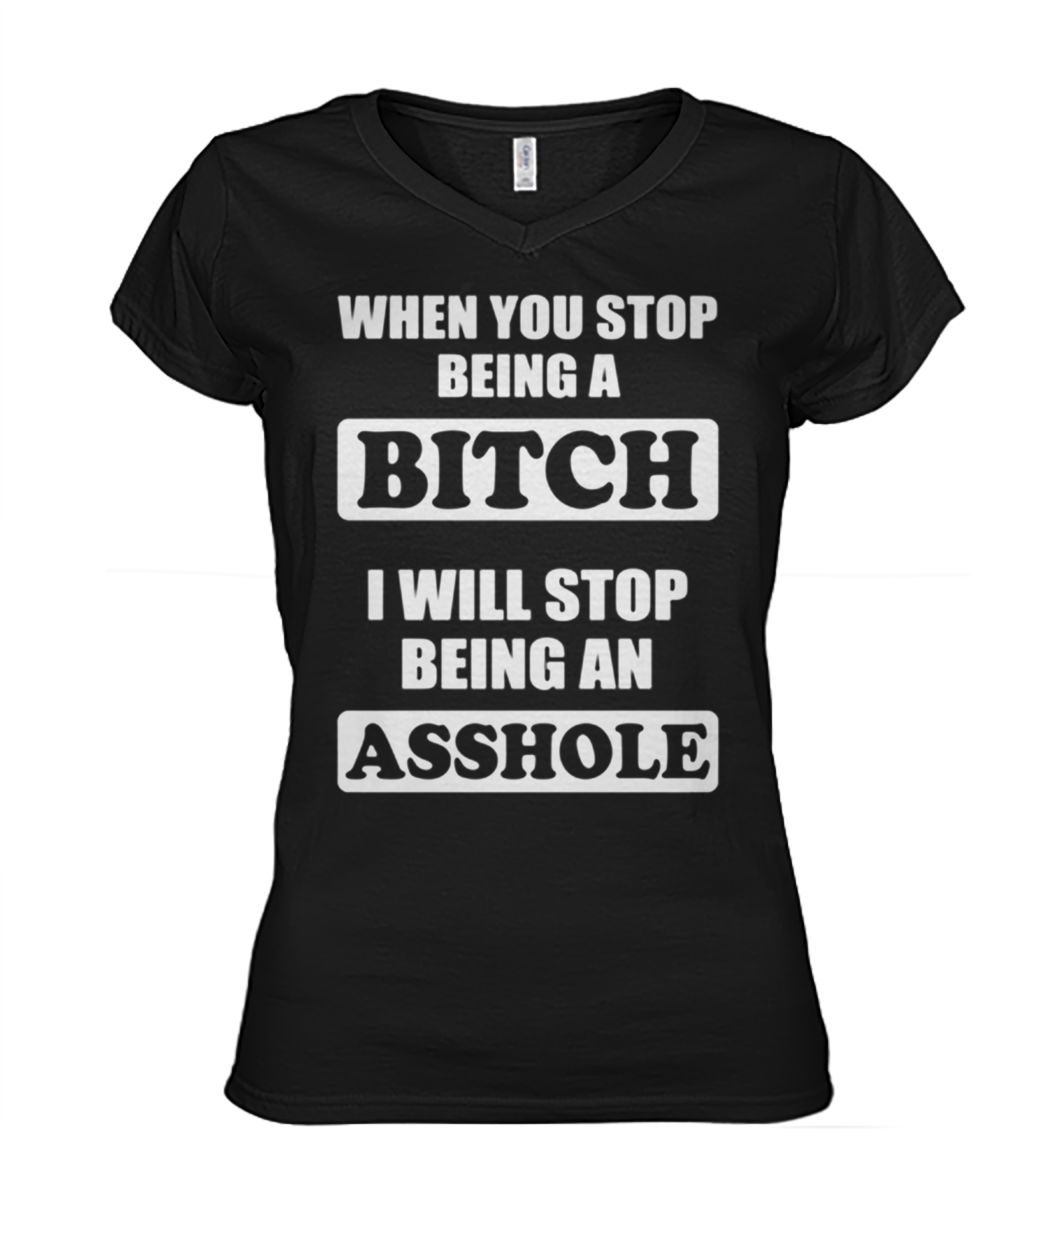 When you stop being a bitch I will stop being an asshole women's v-neck